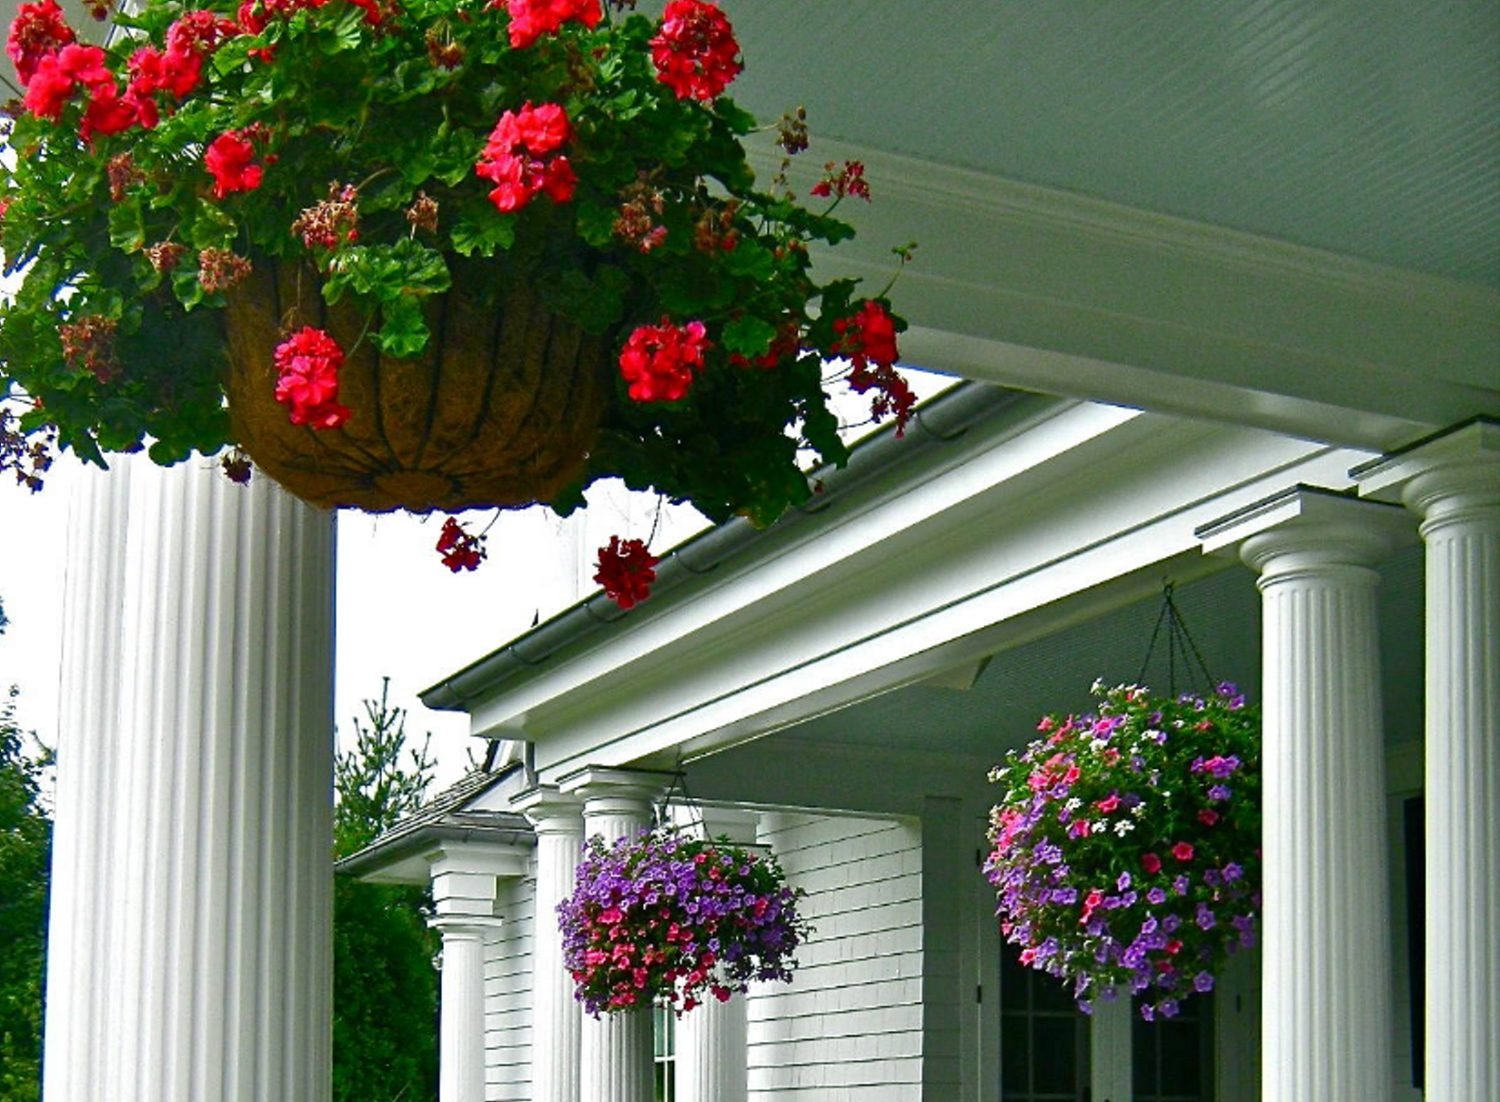 How to Maintain the Beauty and Health of Your Flower Hanging Baskets